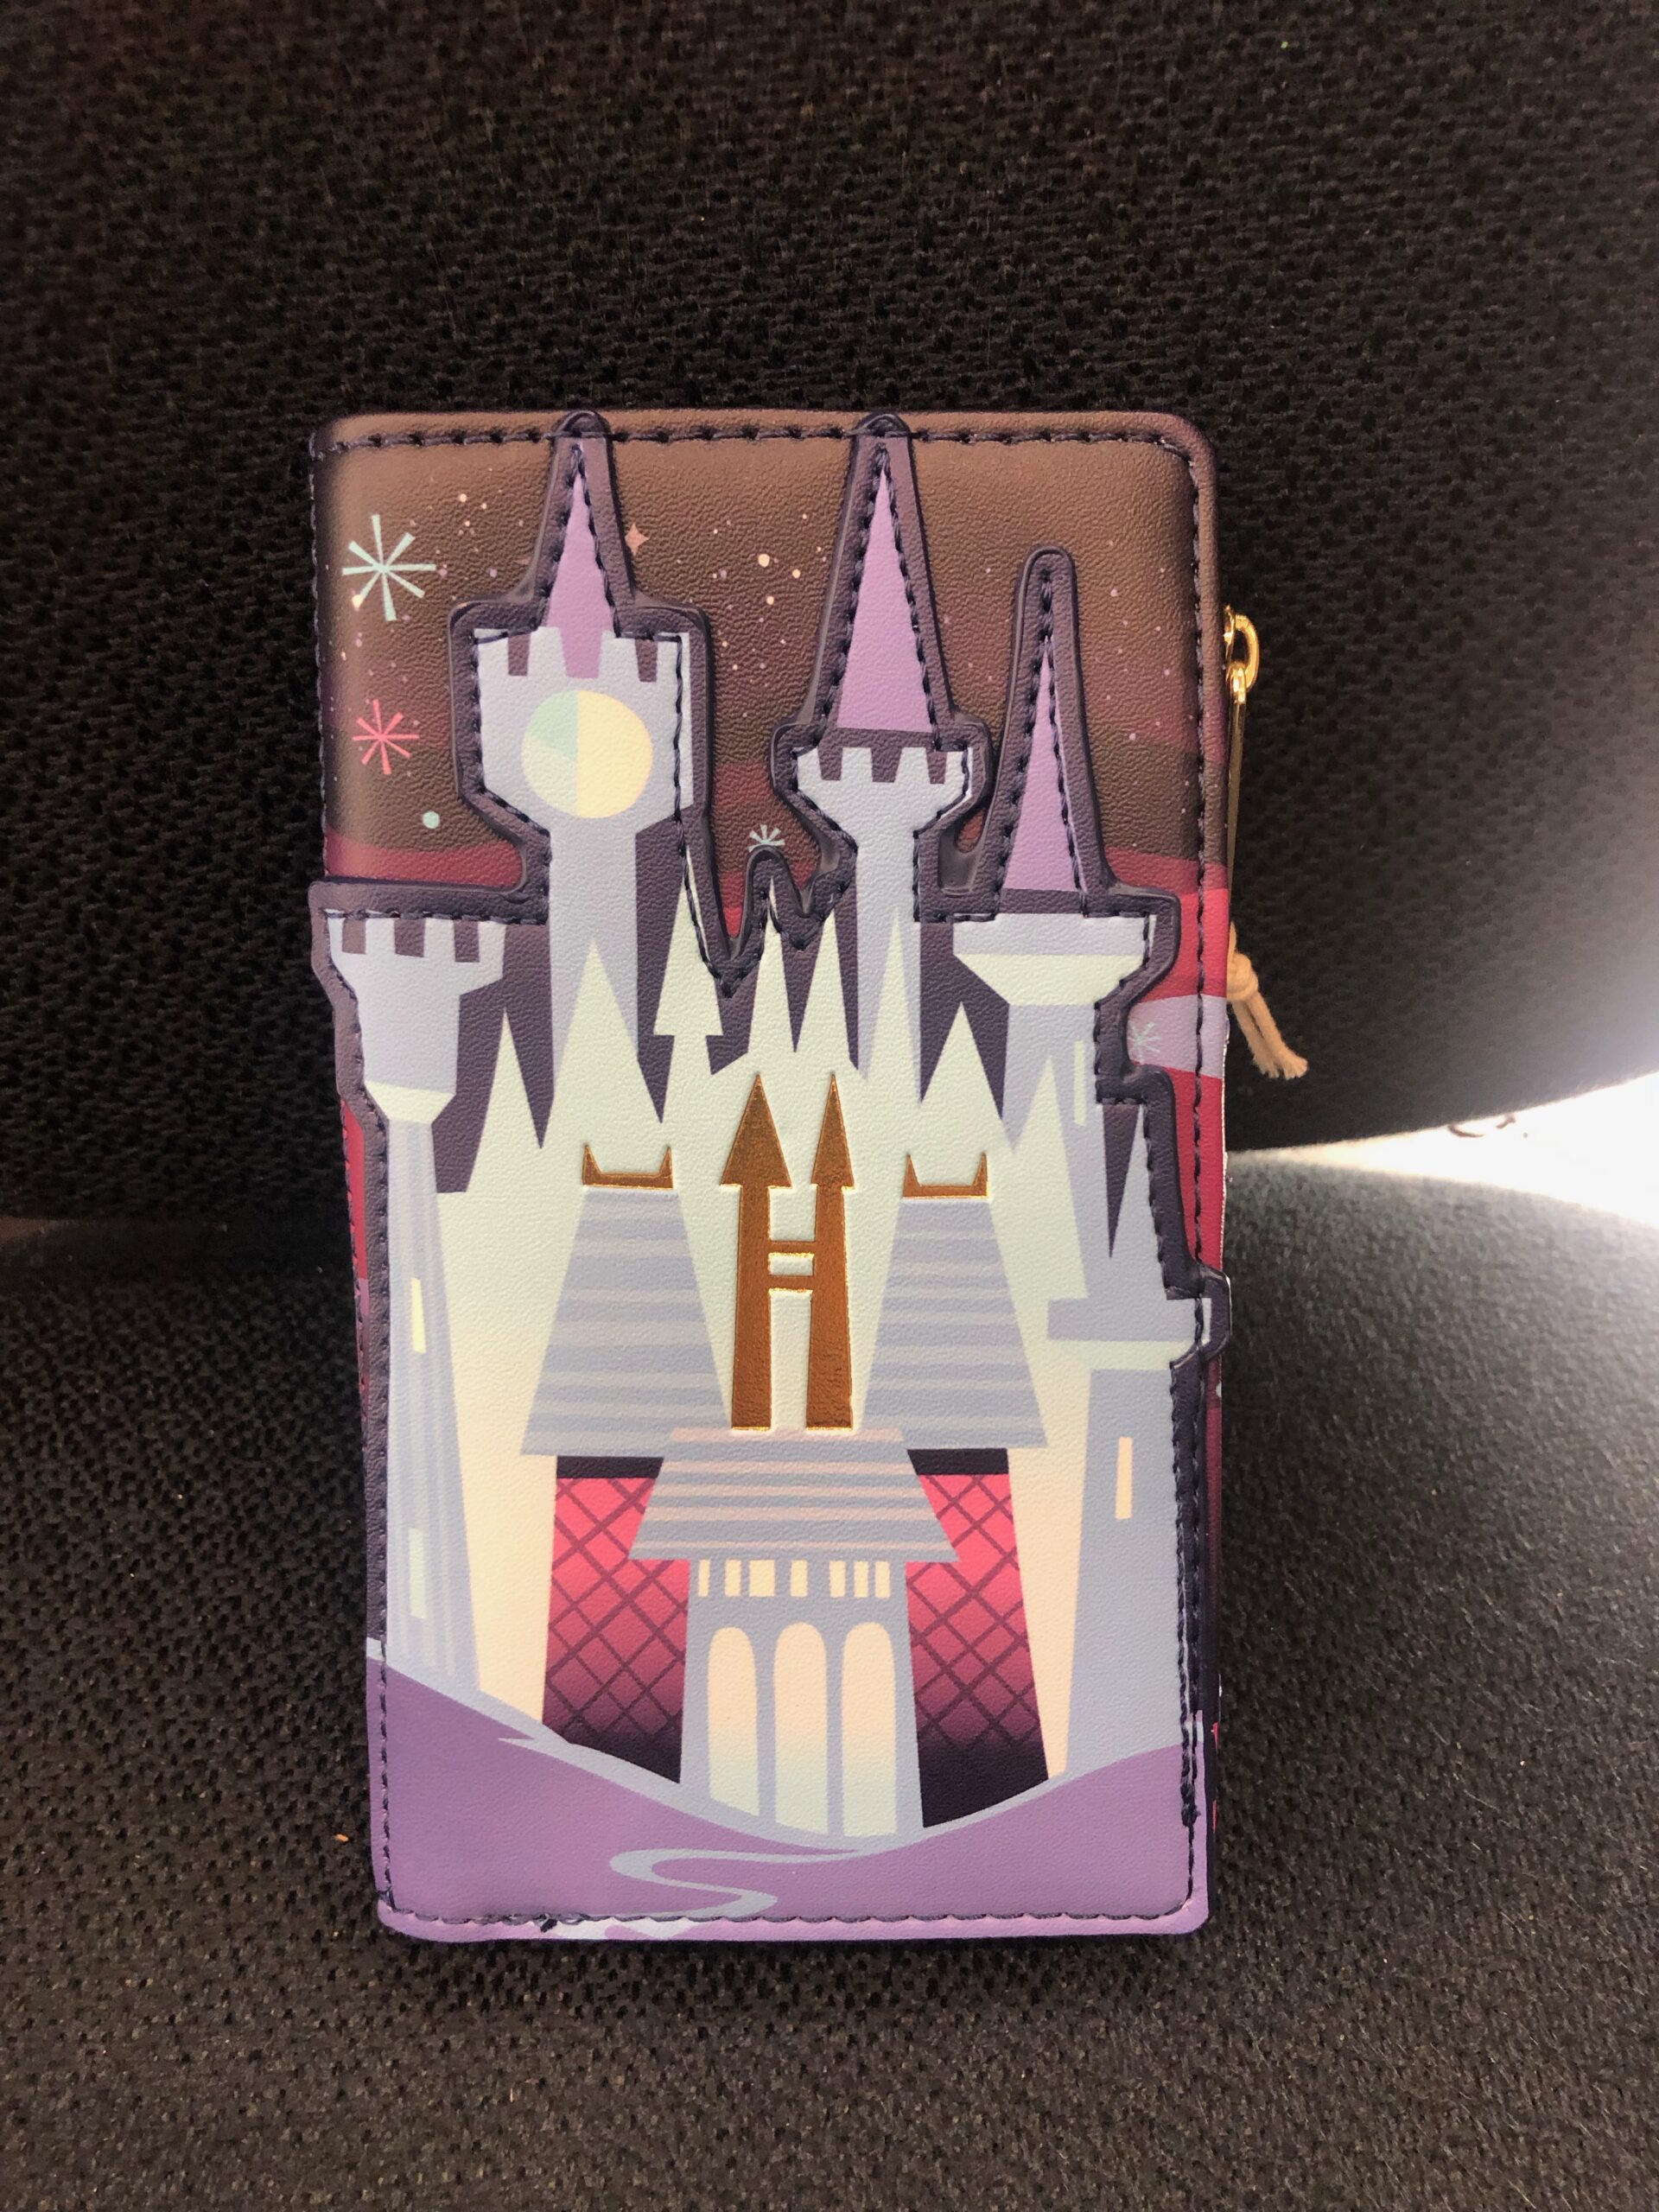 Disney Discovery- Loungefly x Maleficent Embossed Zip Wallet - bags 